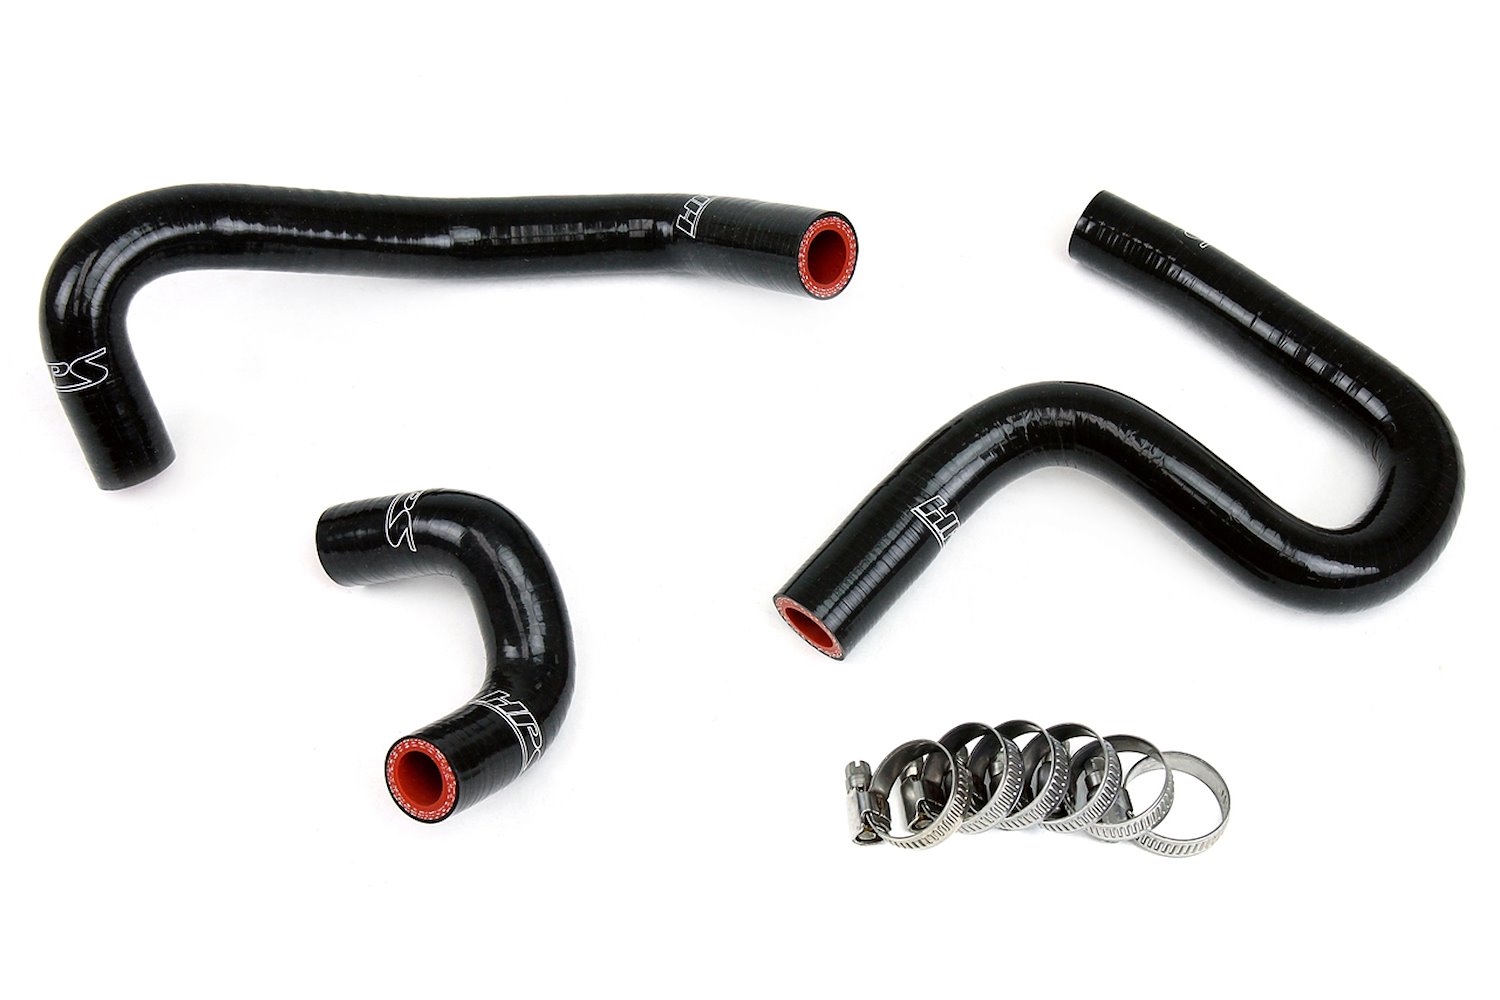 57-1763-BLK Heater Hose Kit, 3-Ply Reinforced Silicone, Replaces Rubber Heater Coolant Hoses